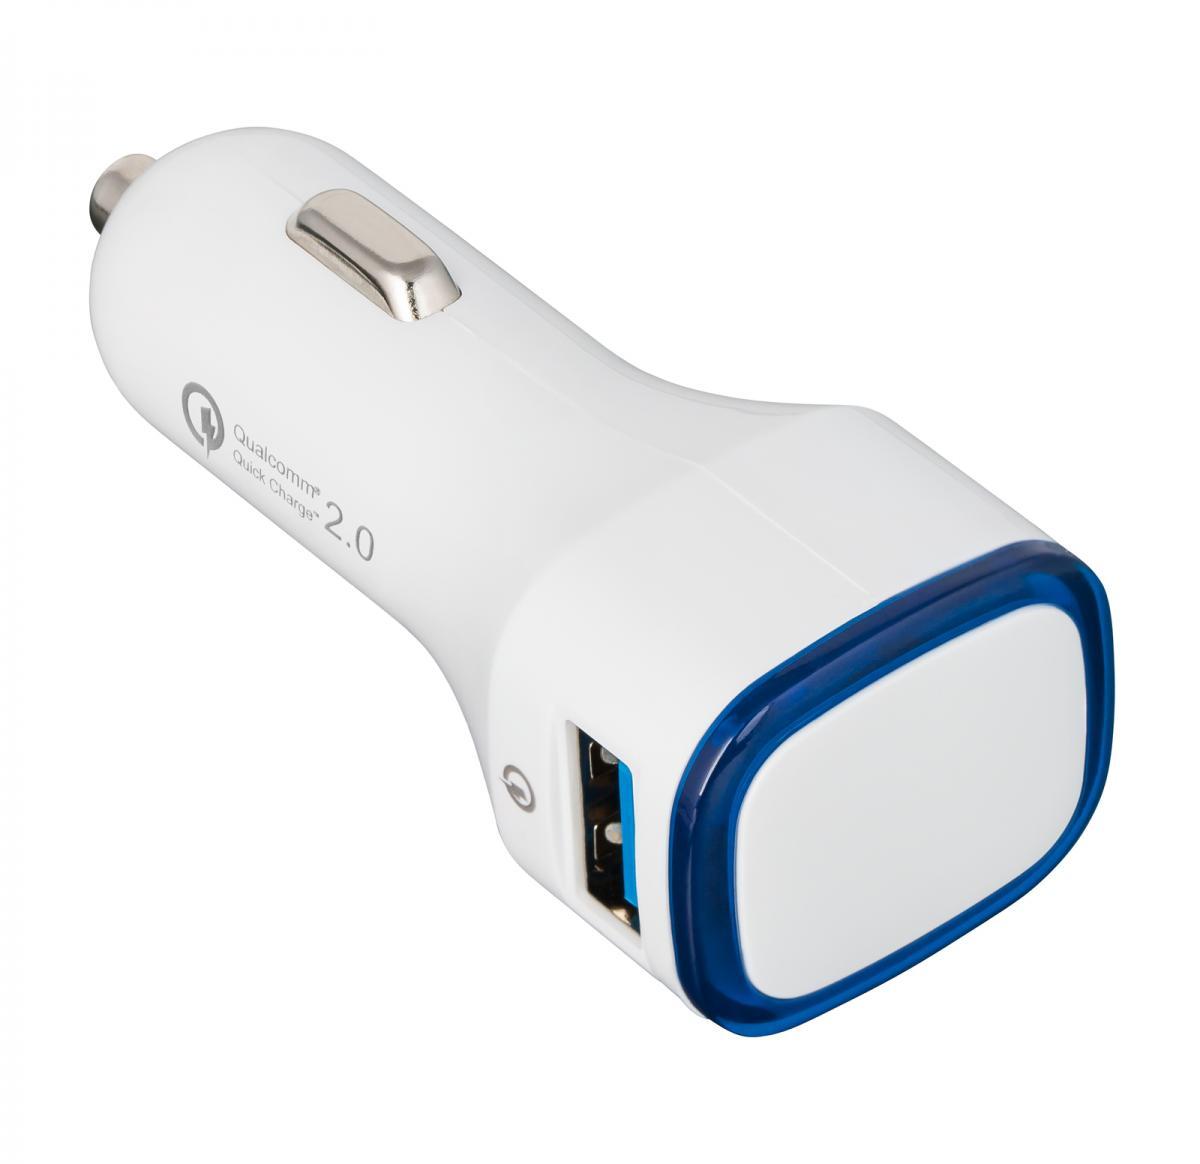 USB car charger QuickCharge 2.0® -COLLECTION 500